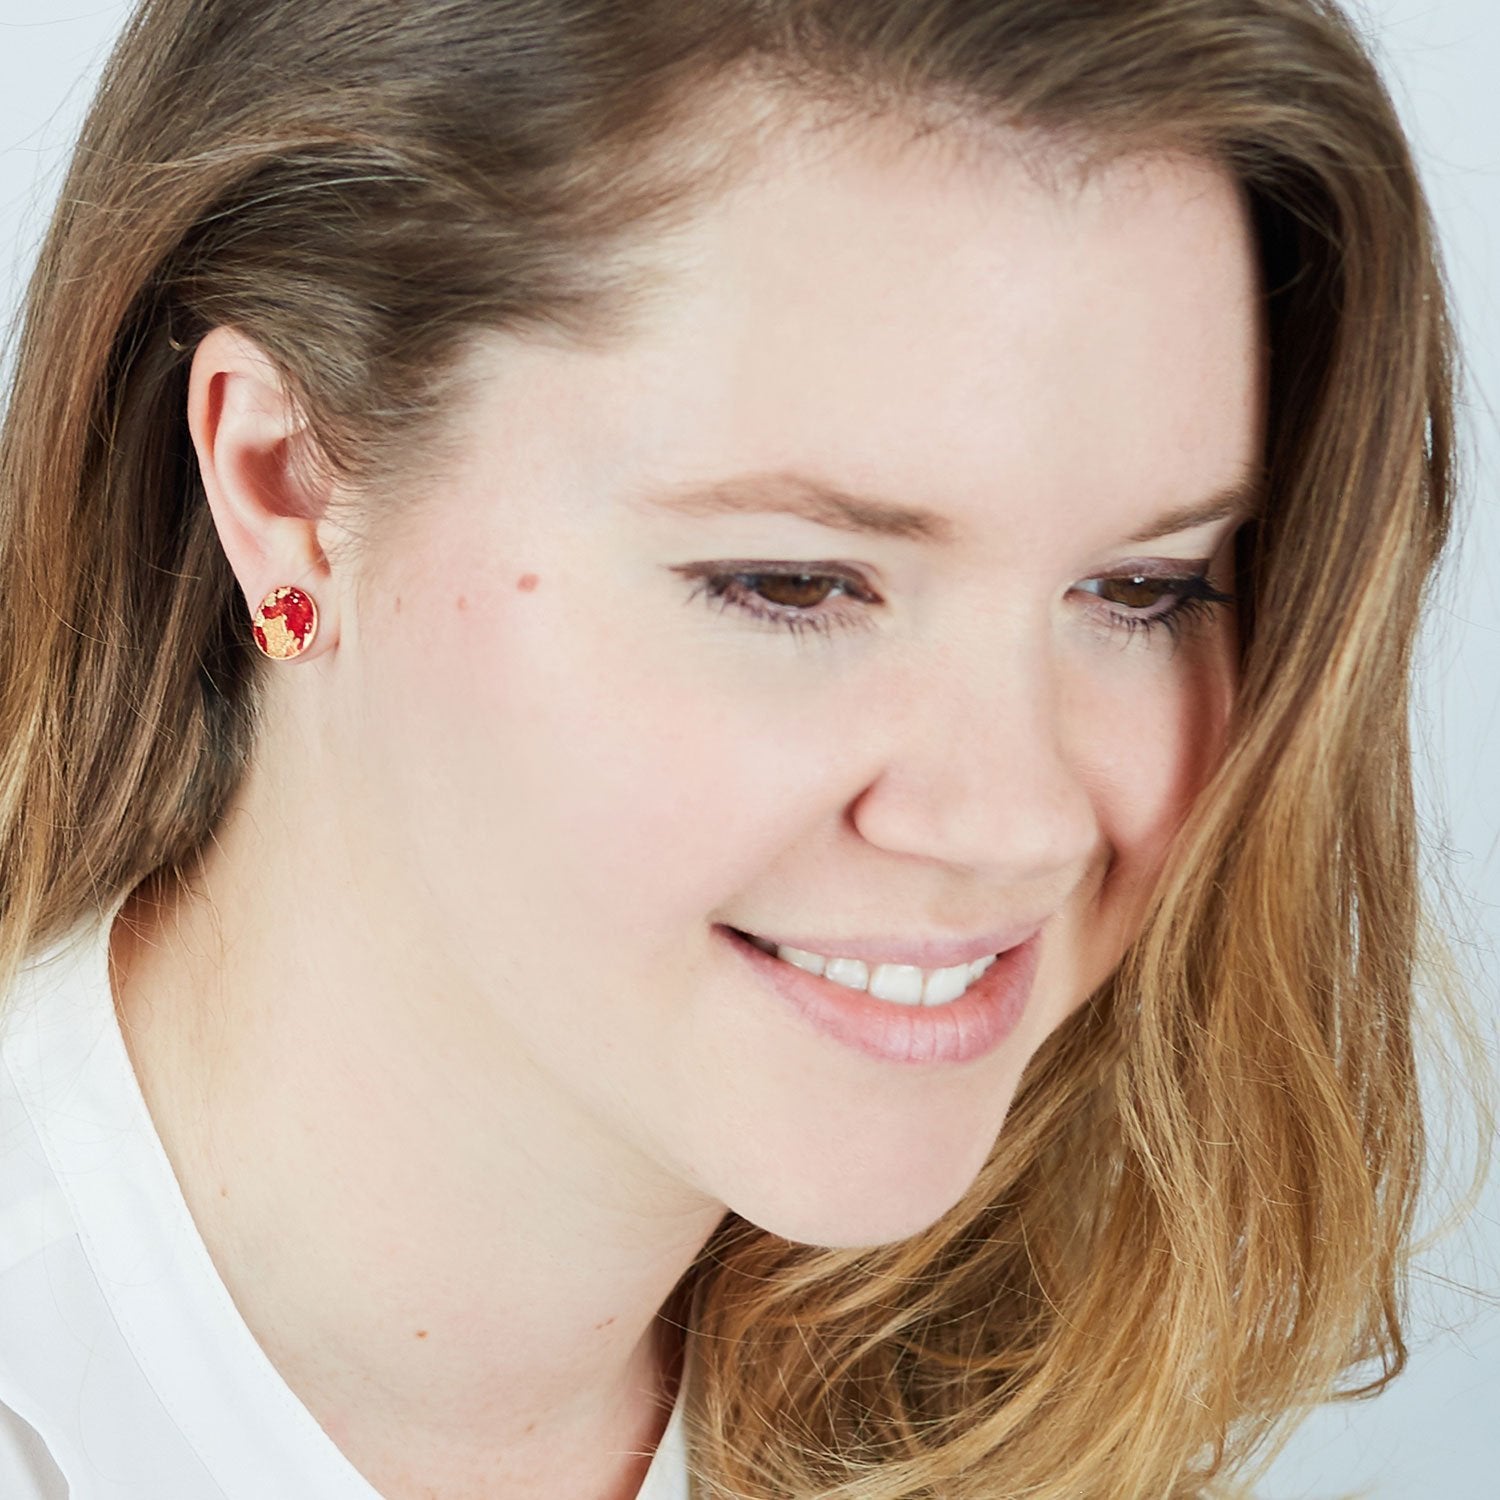 14K Gold Plated Dot Stud Earrings - Available in more colors